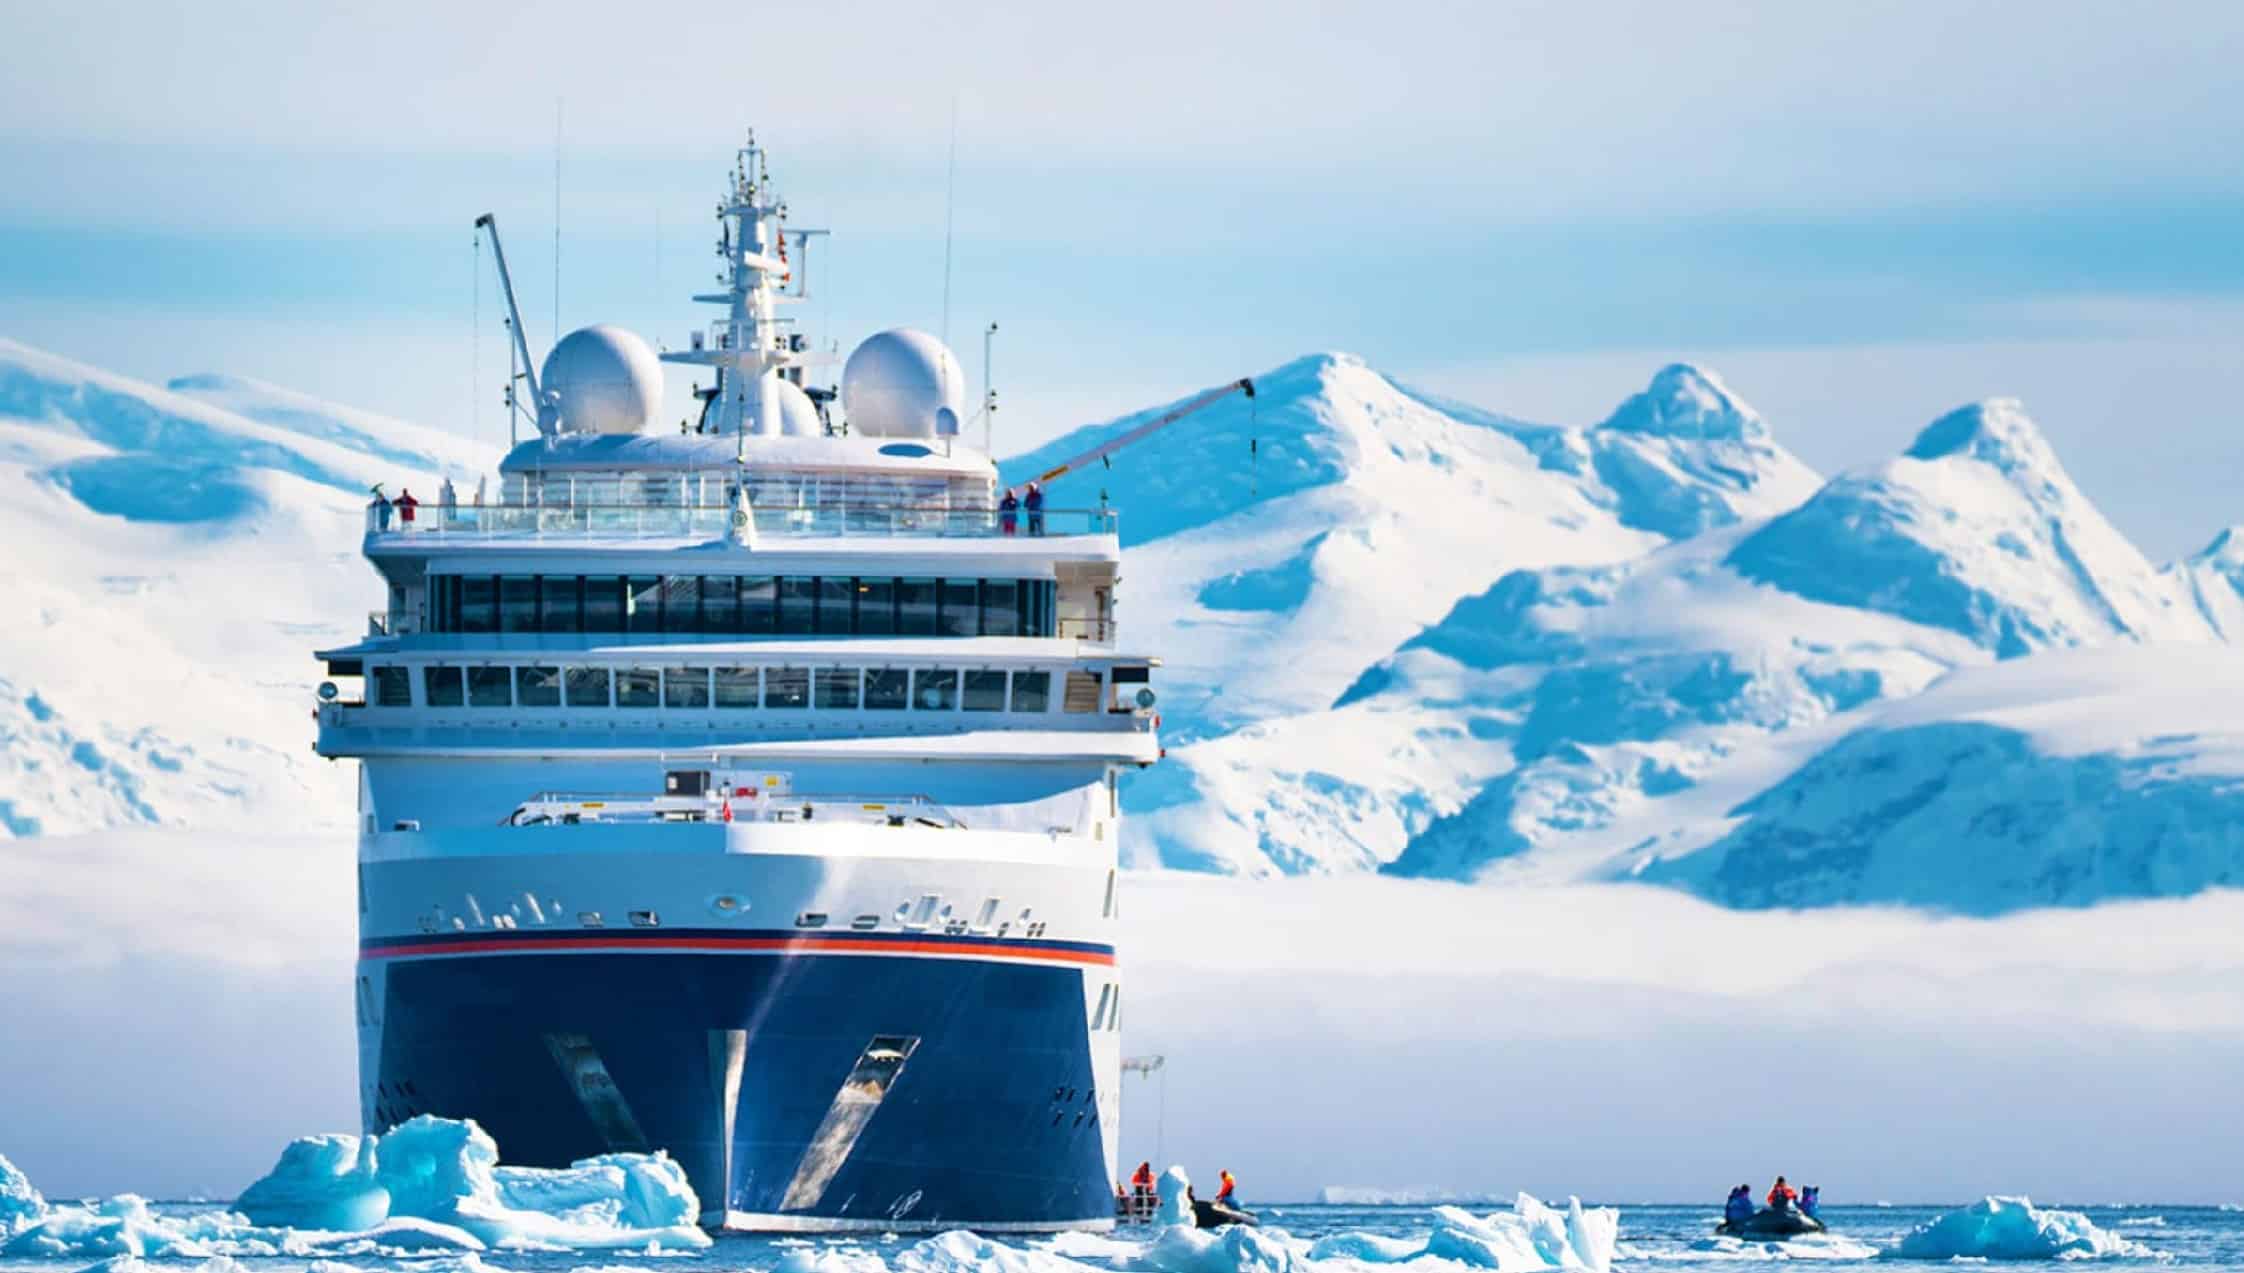 Cruise ships become more environmentally friendly - charter the first hybrid expedition ship with OceanEvent